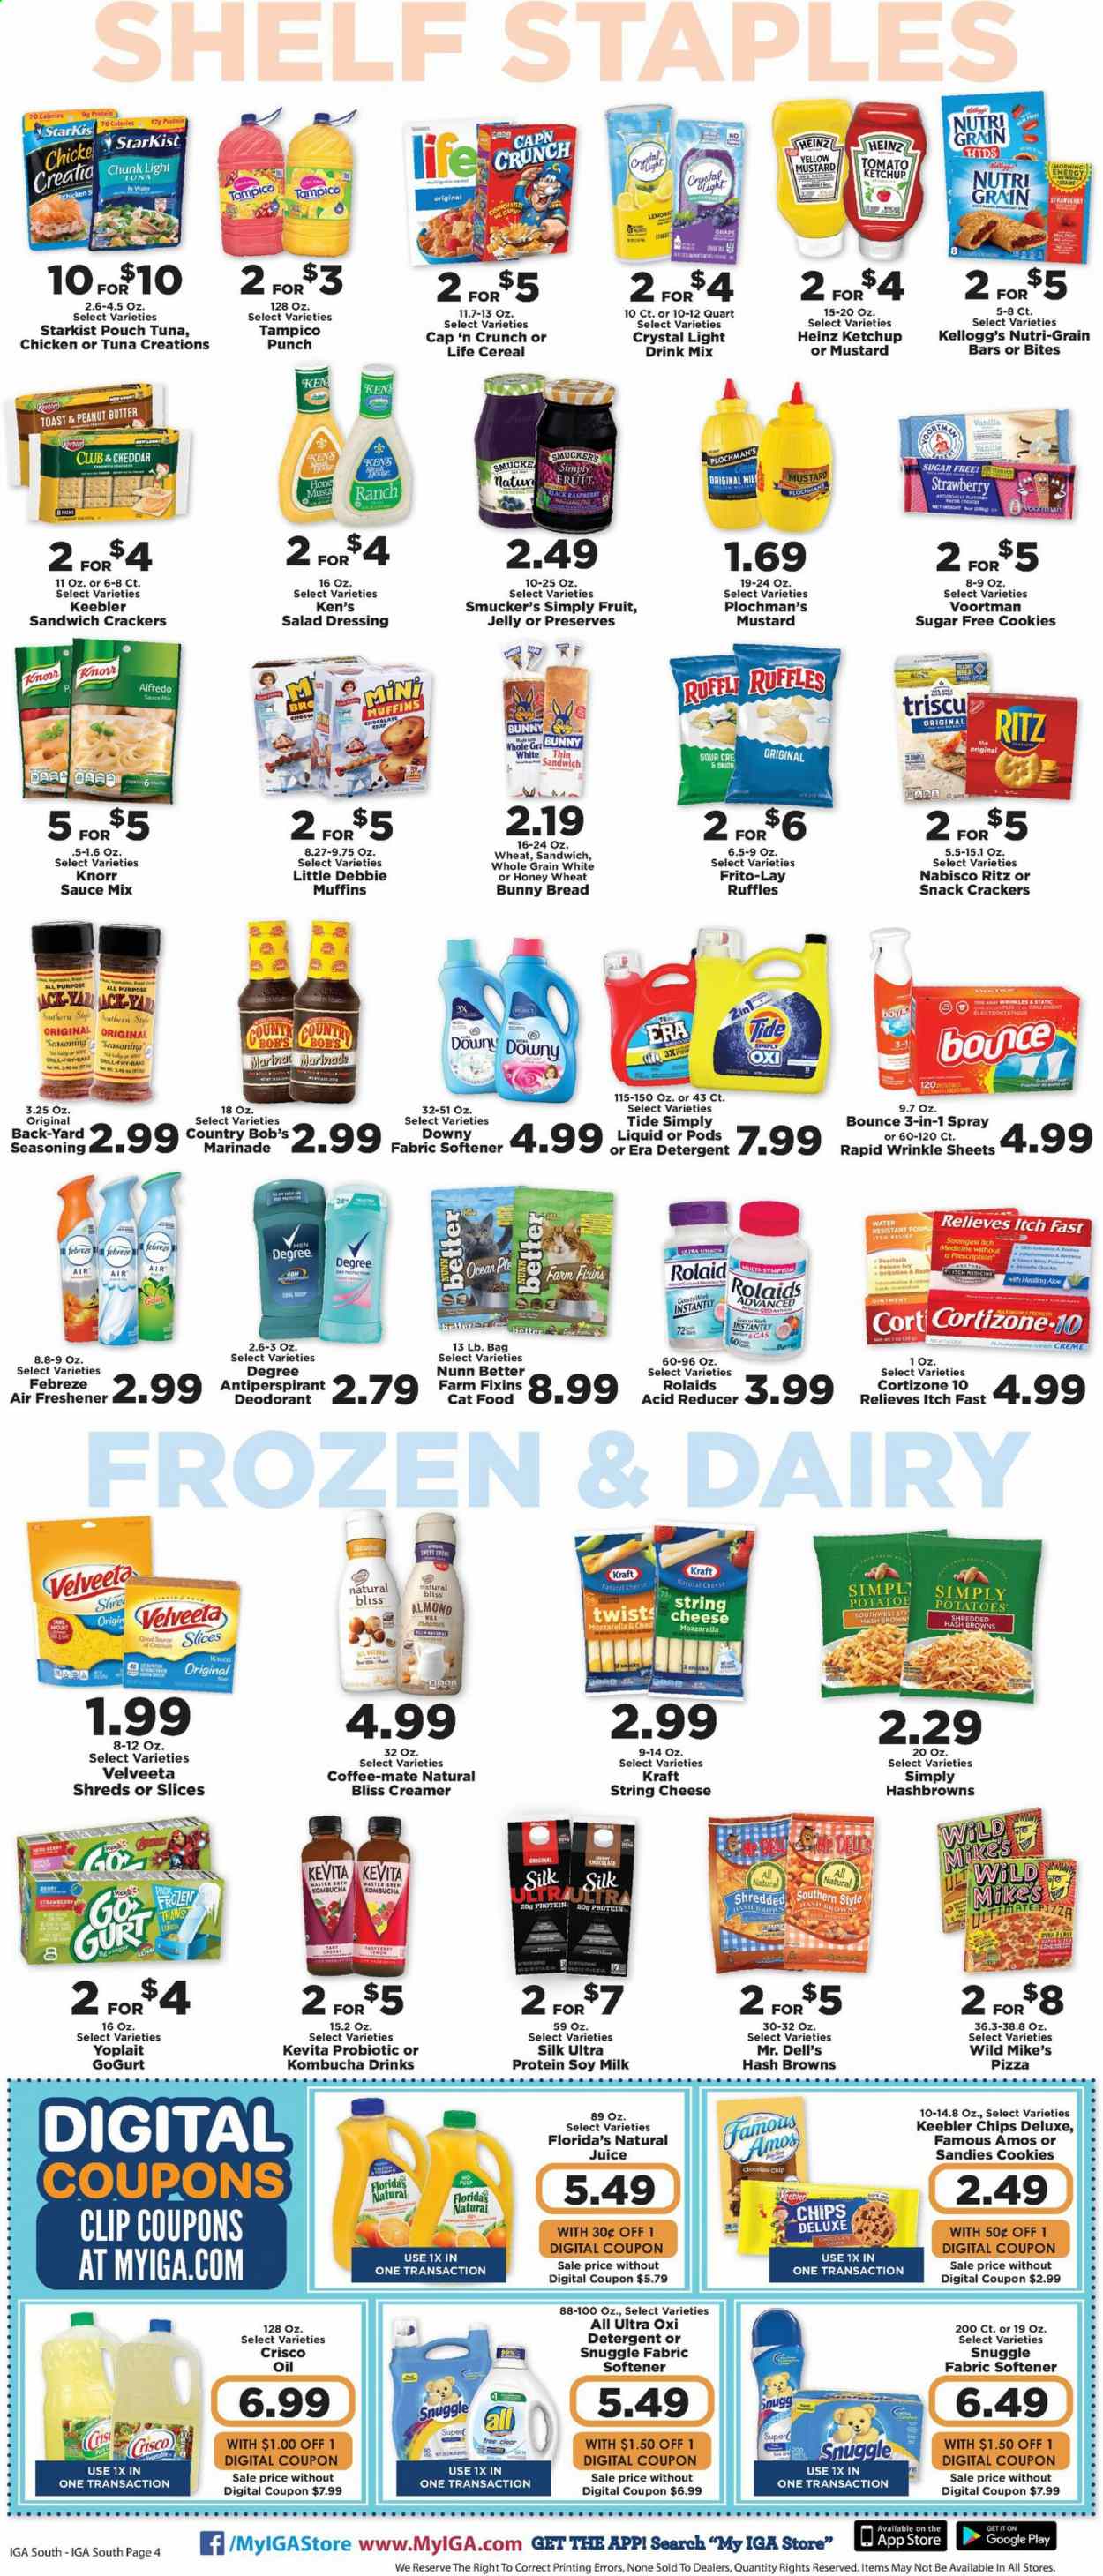 thumbnail - IGA Flyer - 07/14/2021 - 07/20/2021 - Sales products - bread, tart, muffin, potatoes, onion, StarKist, pizza, Knorr, sauce, Quaker, Kraft®, string cheese, Yoplait, Coffee-Mate, soy milk, Silk, creamer, hash browns, cookies, wafers, jelly, crackers, Kellogg's, chocolate bunny, Florida's Natural, Keebler, RITZ, Frito-Lay, Ruffles, Crisco, Heinz, cereals, Nutri-Grain, spice, mustard, salad dressing, ketchup, dressing, marinade, oil, peanut butter, juice, fruit punch, kombucha, KeVita, ointment, detergent, Febreze, Gain, Snuggle, Tide, fabric softener, Bounce, Downy Laundry, anti-perspirant, deodorant, Yard, pot, air freshener, animal food, cat food. Page 4.